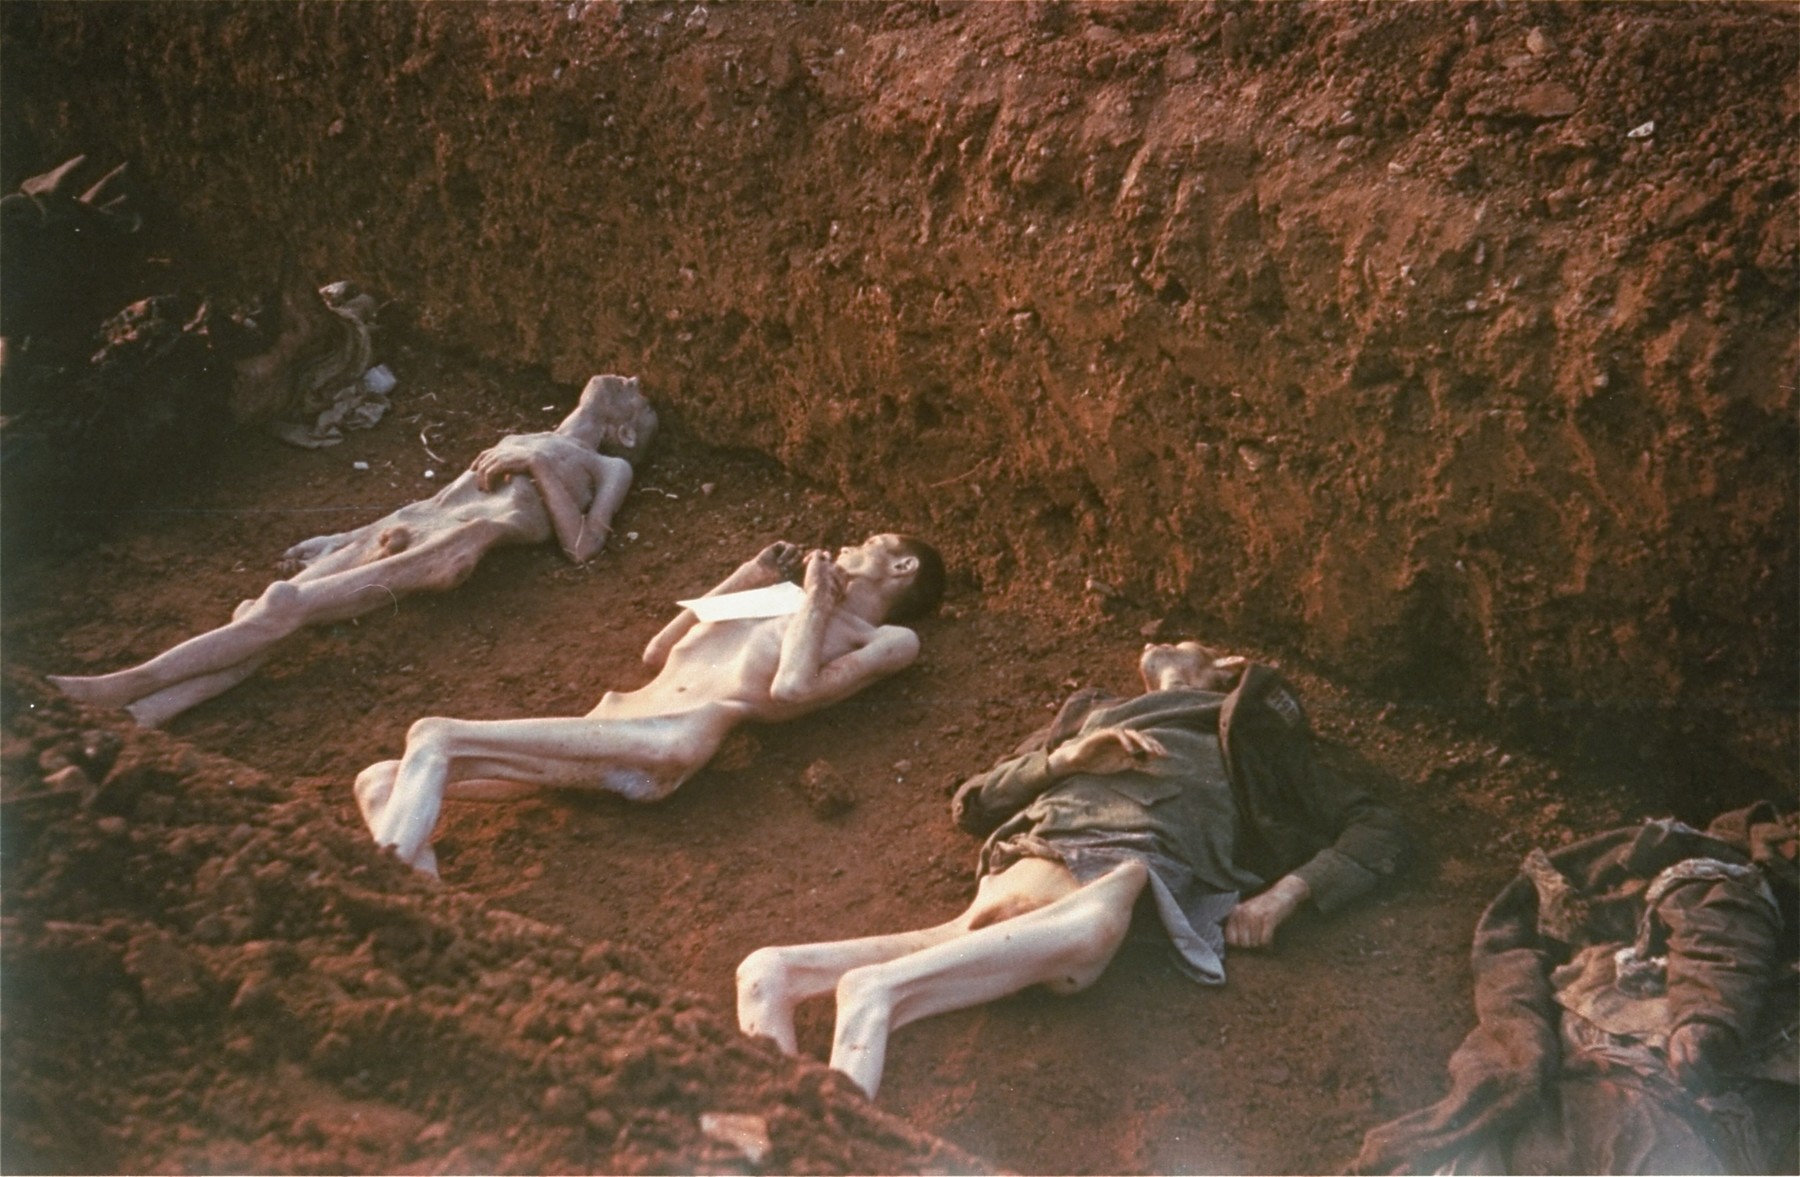 The bodies of prisoners killed in the Nordhausen concentration camp lie in a mass grave dug by German civilians under orders from American troops.